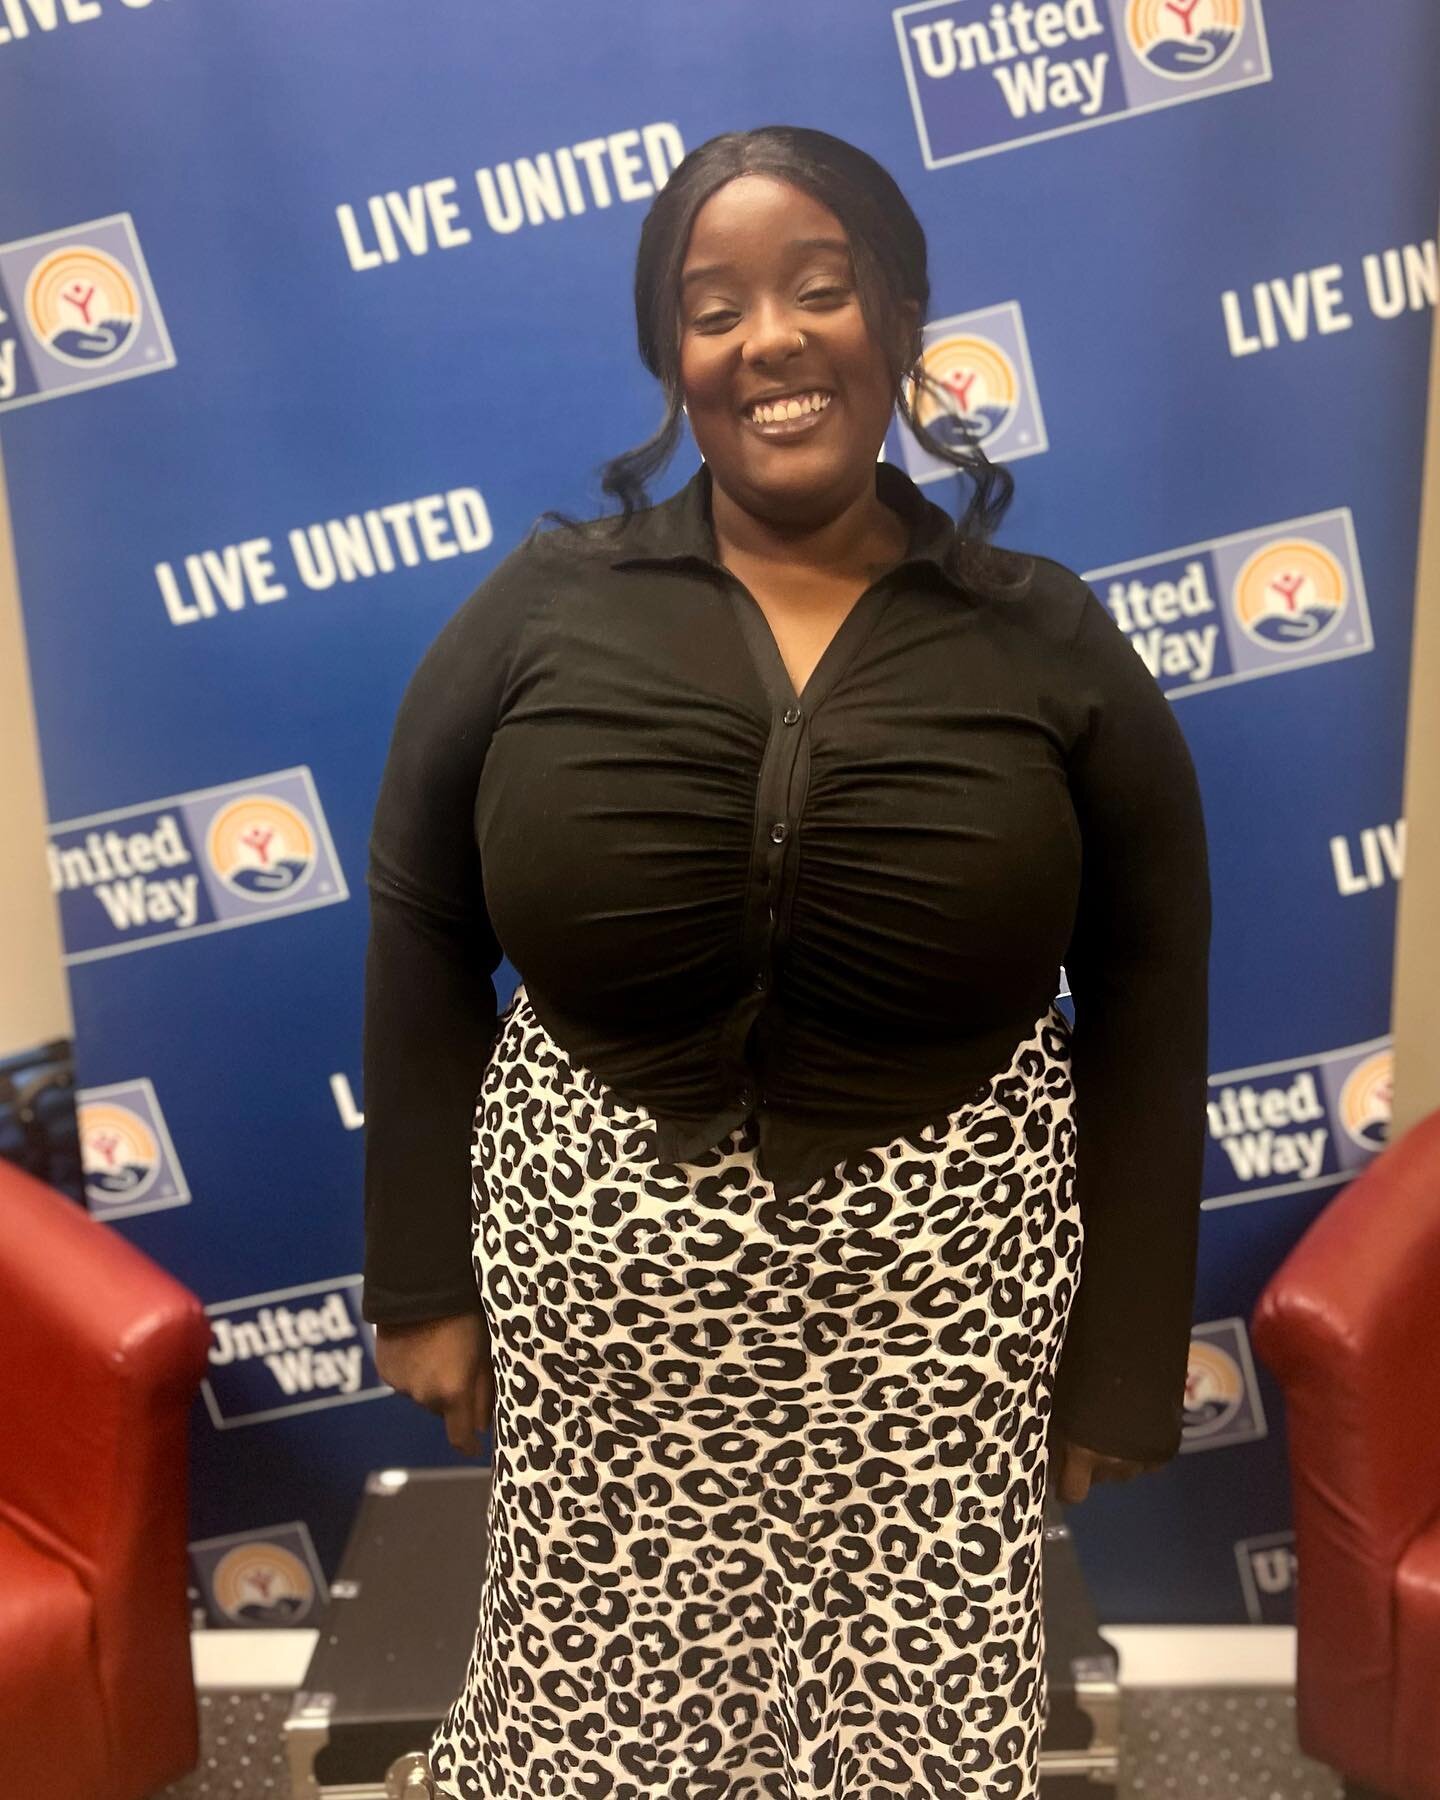 Please help us welcome our newest team member, Jaliyah Townsend! 😃

Jaliyah is joining our team as a Community Engagement Specialist. Part of her job will be amplifying and leading many of our internal impact programs like our Ready to Learn Initiat